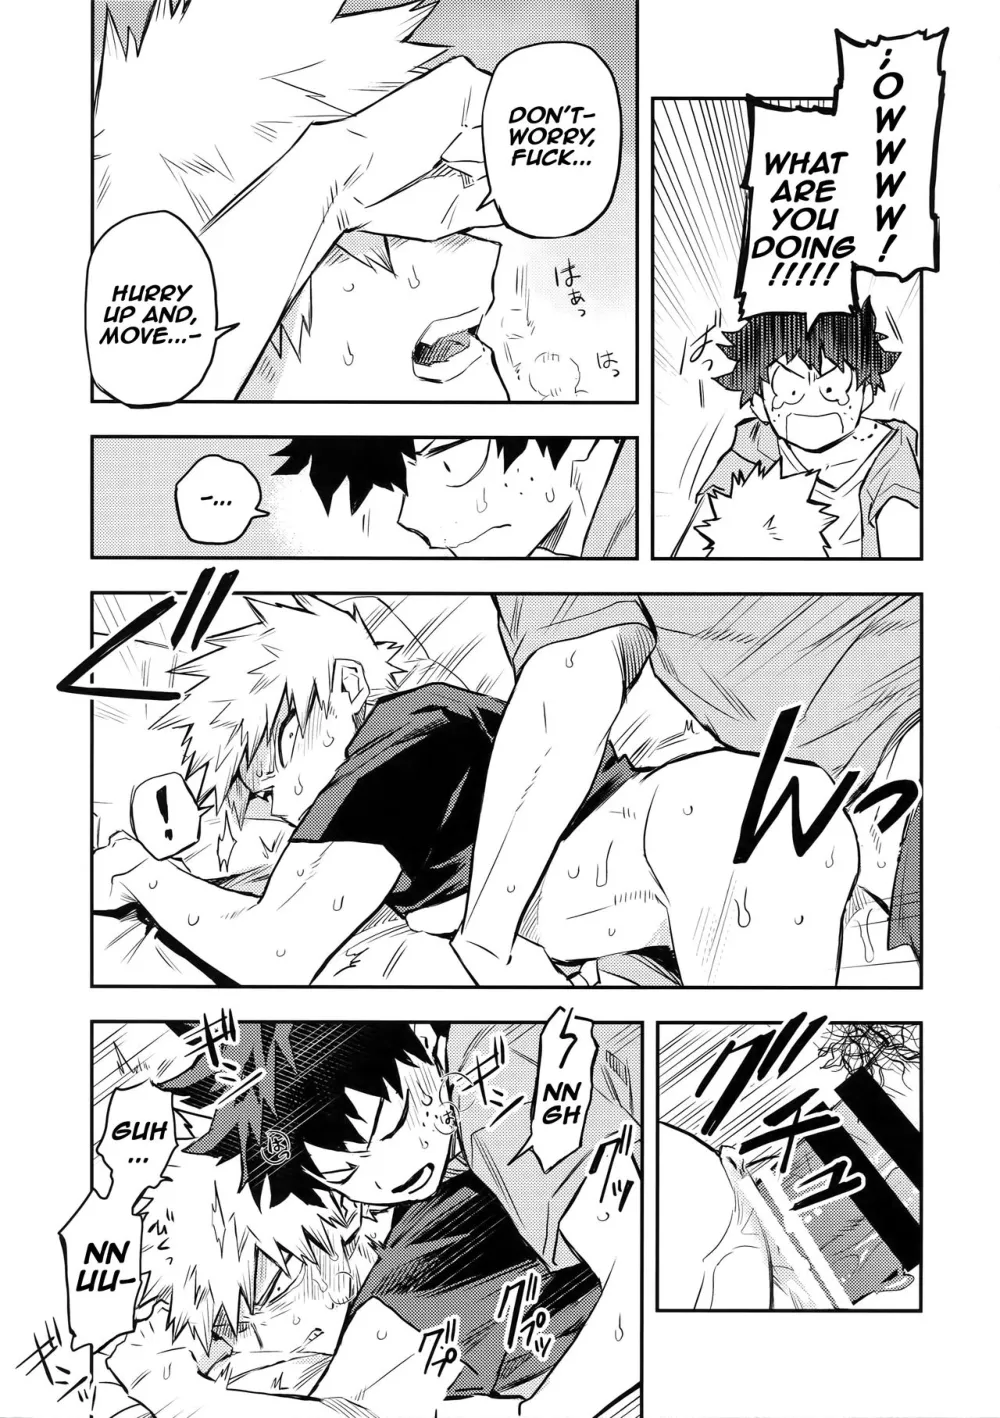 The Battle Between Sick Kacchan and Me - Page 18